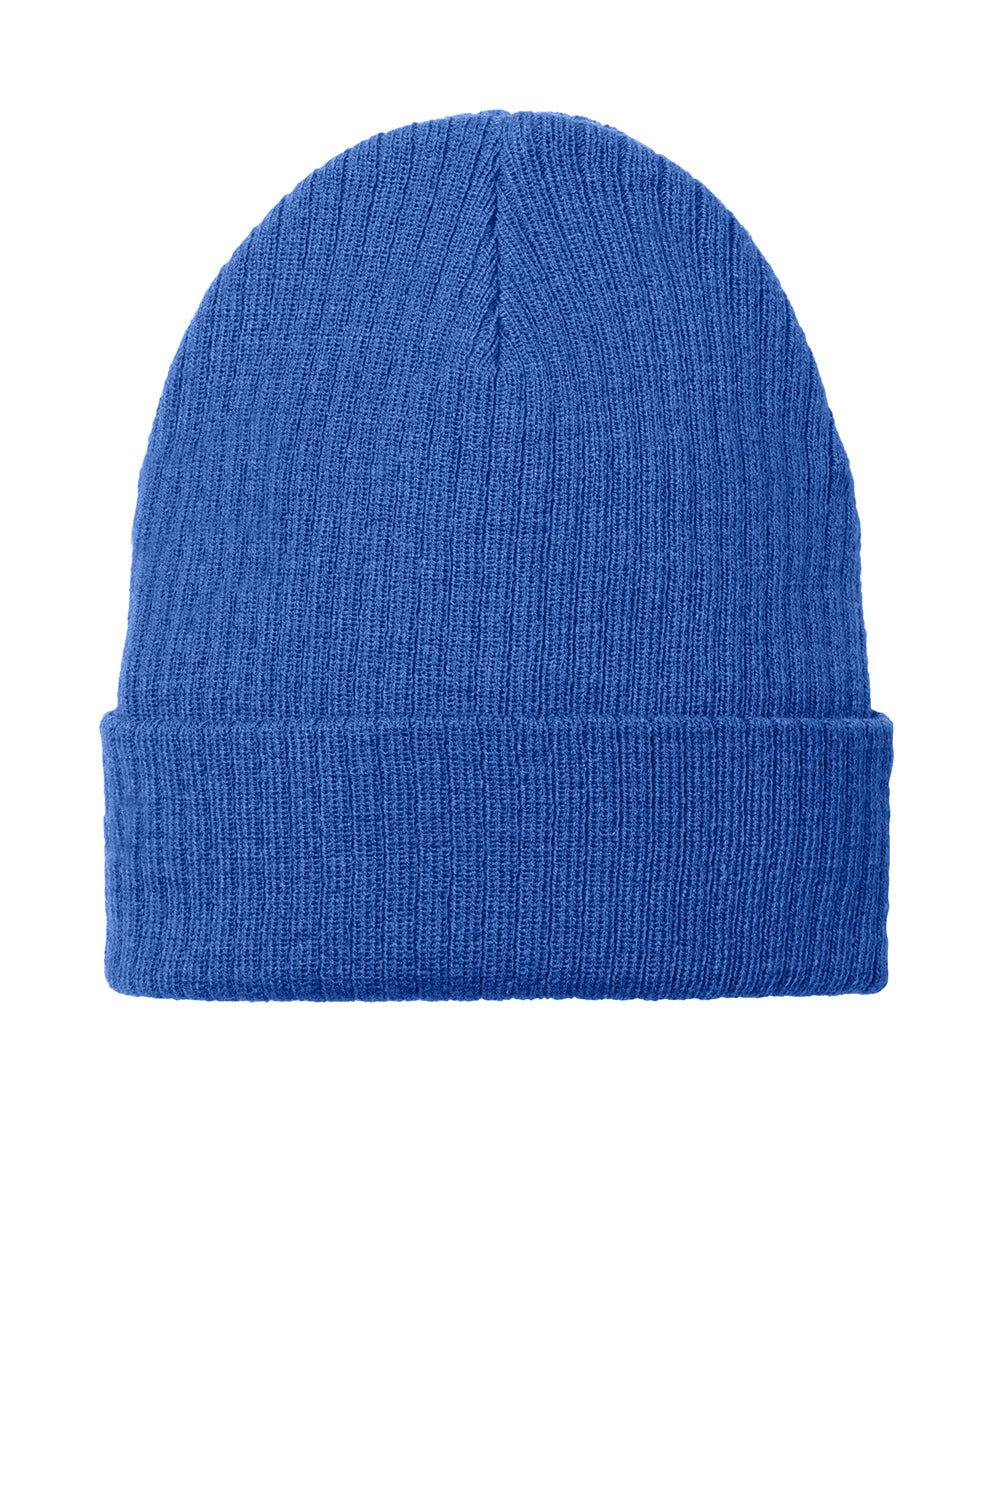 Port Authority C880 Mens C-Free Recycled Beanie True Royal Blue Front